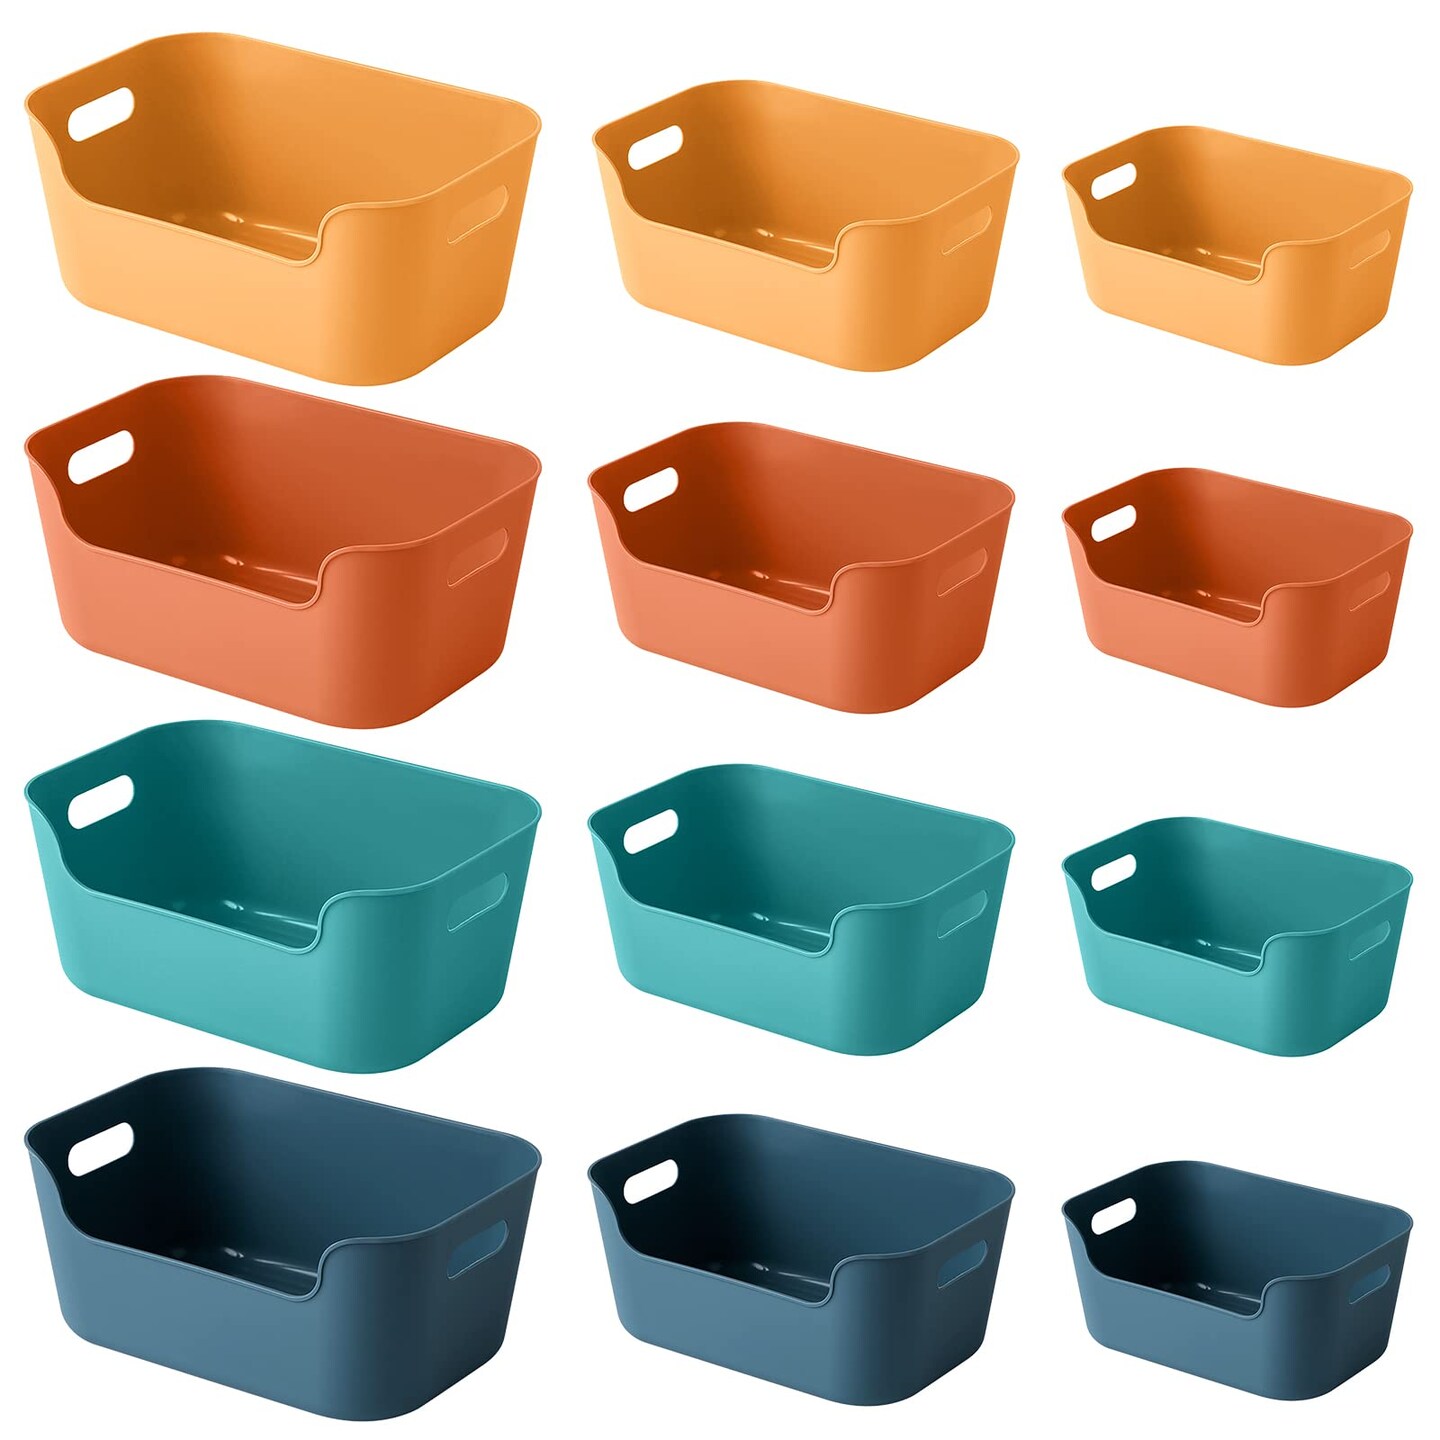 OWill 12-Pack Mixed Plastic Storage Bins and Baskets for Efficient Home Classroom Organization - Small Containers in Multiple Colors for Kitchen, Cupboard Box, Bathroom Organizer on Shelves and Tubs